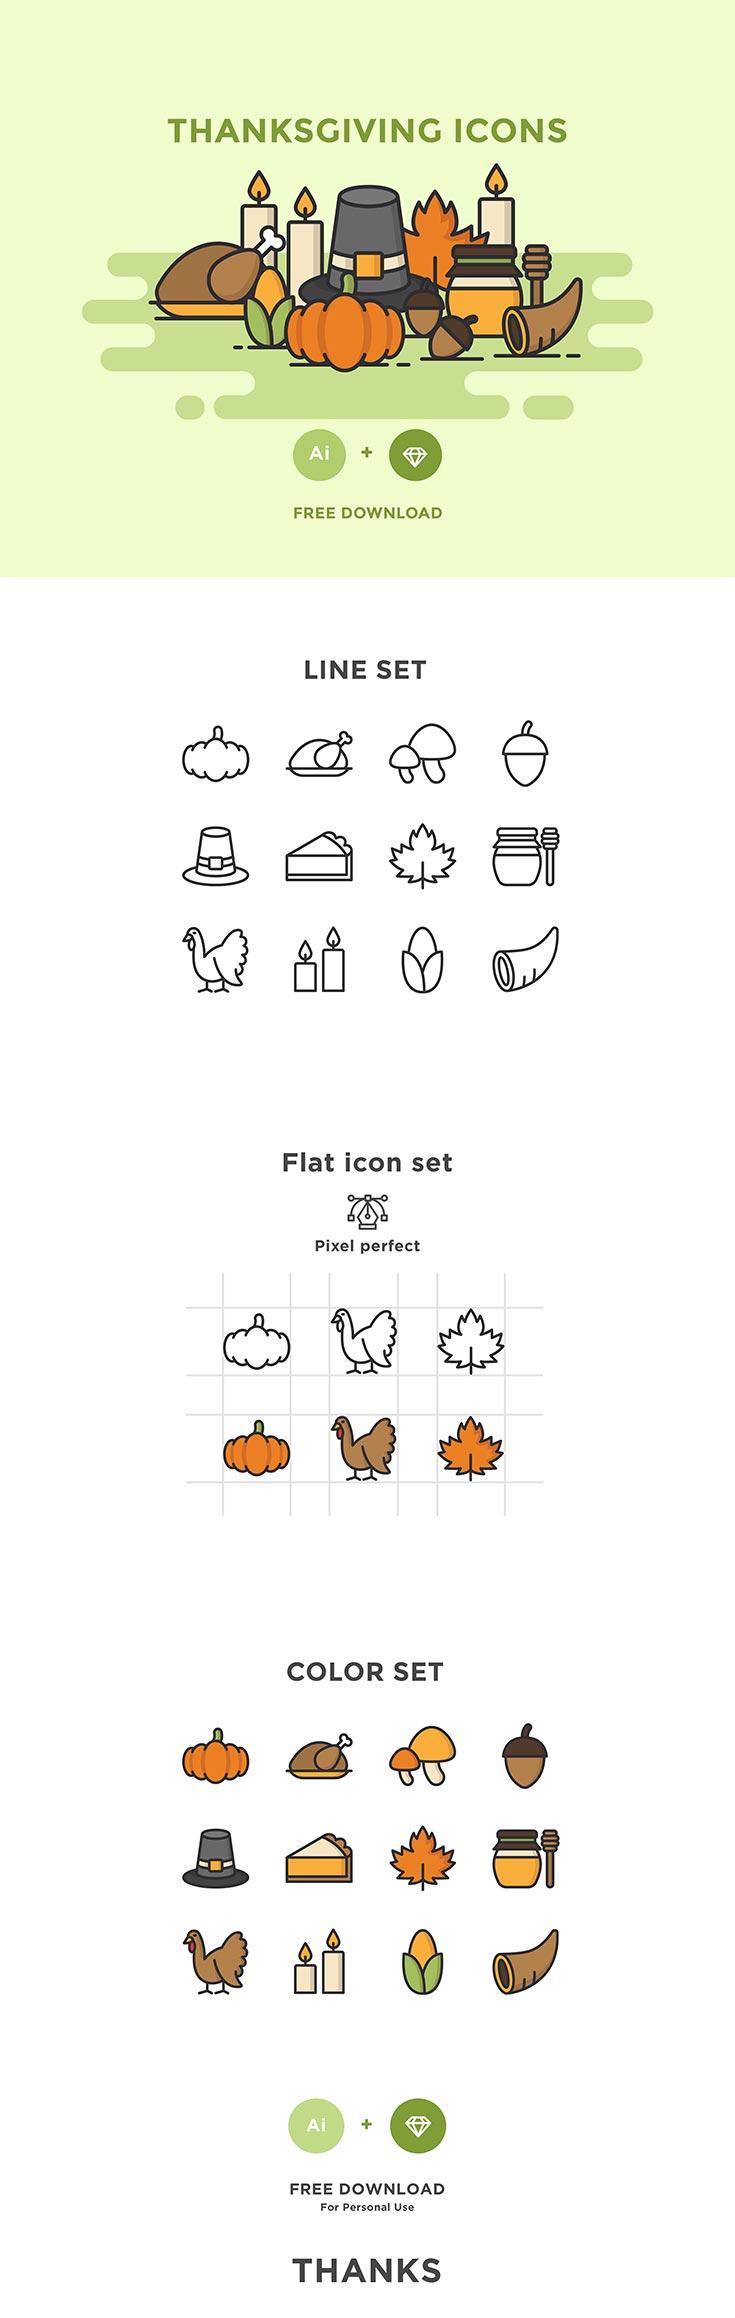 Free Thanksgiving Icons Pack